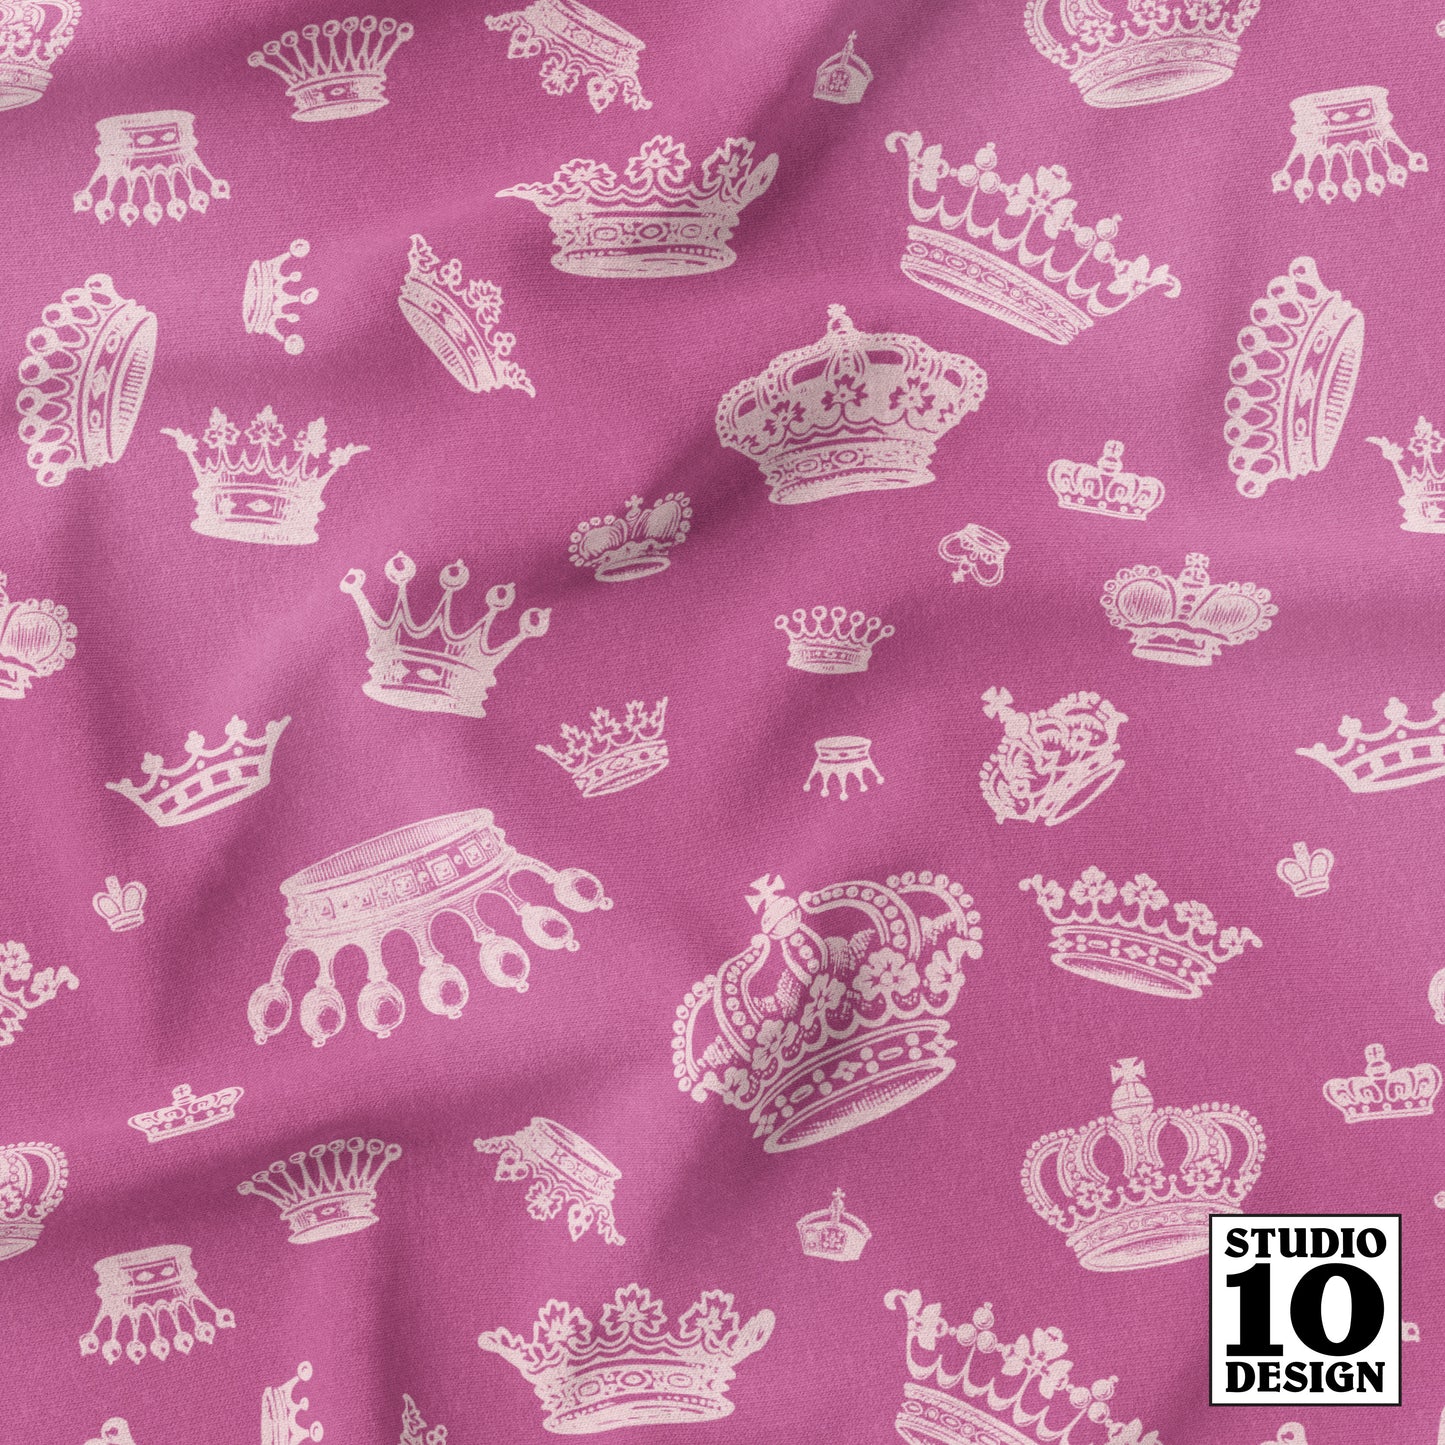 Royal Crowns Cotton Candy+Peony Printed Fabric by Studio Ten Design